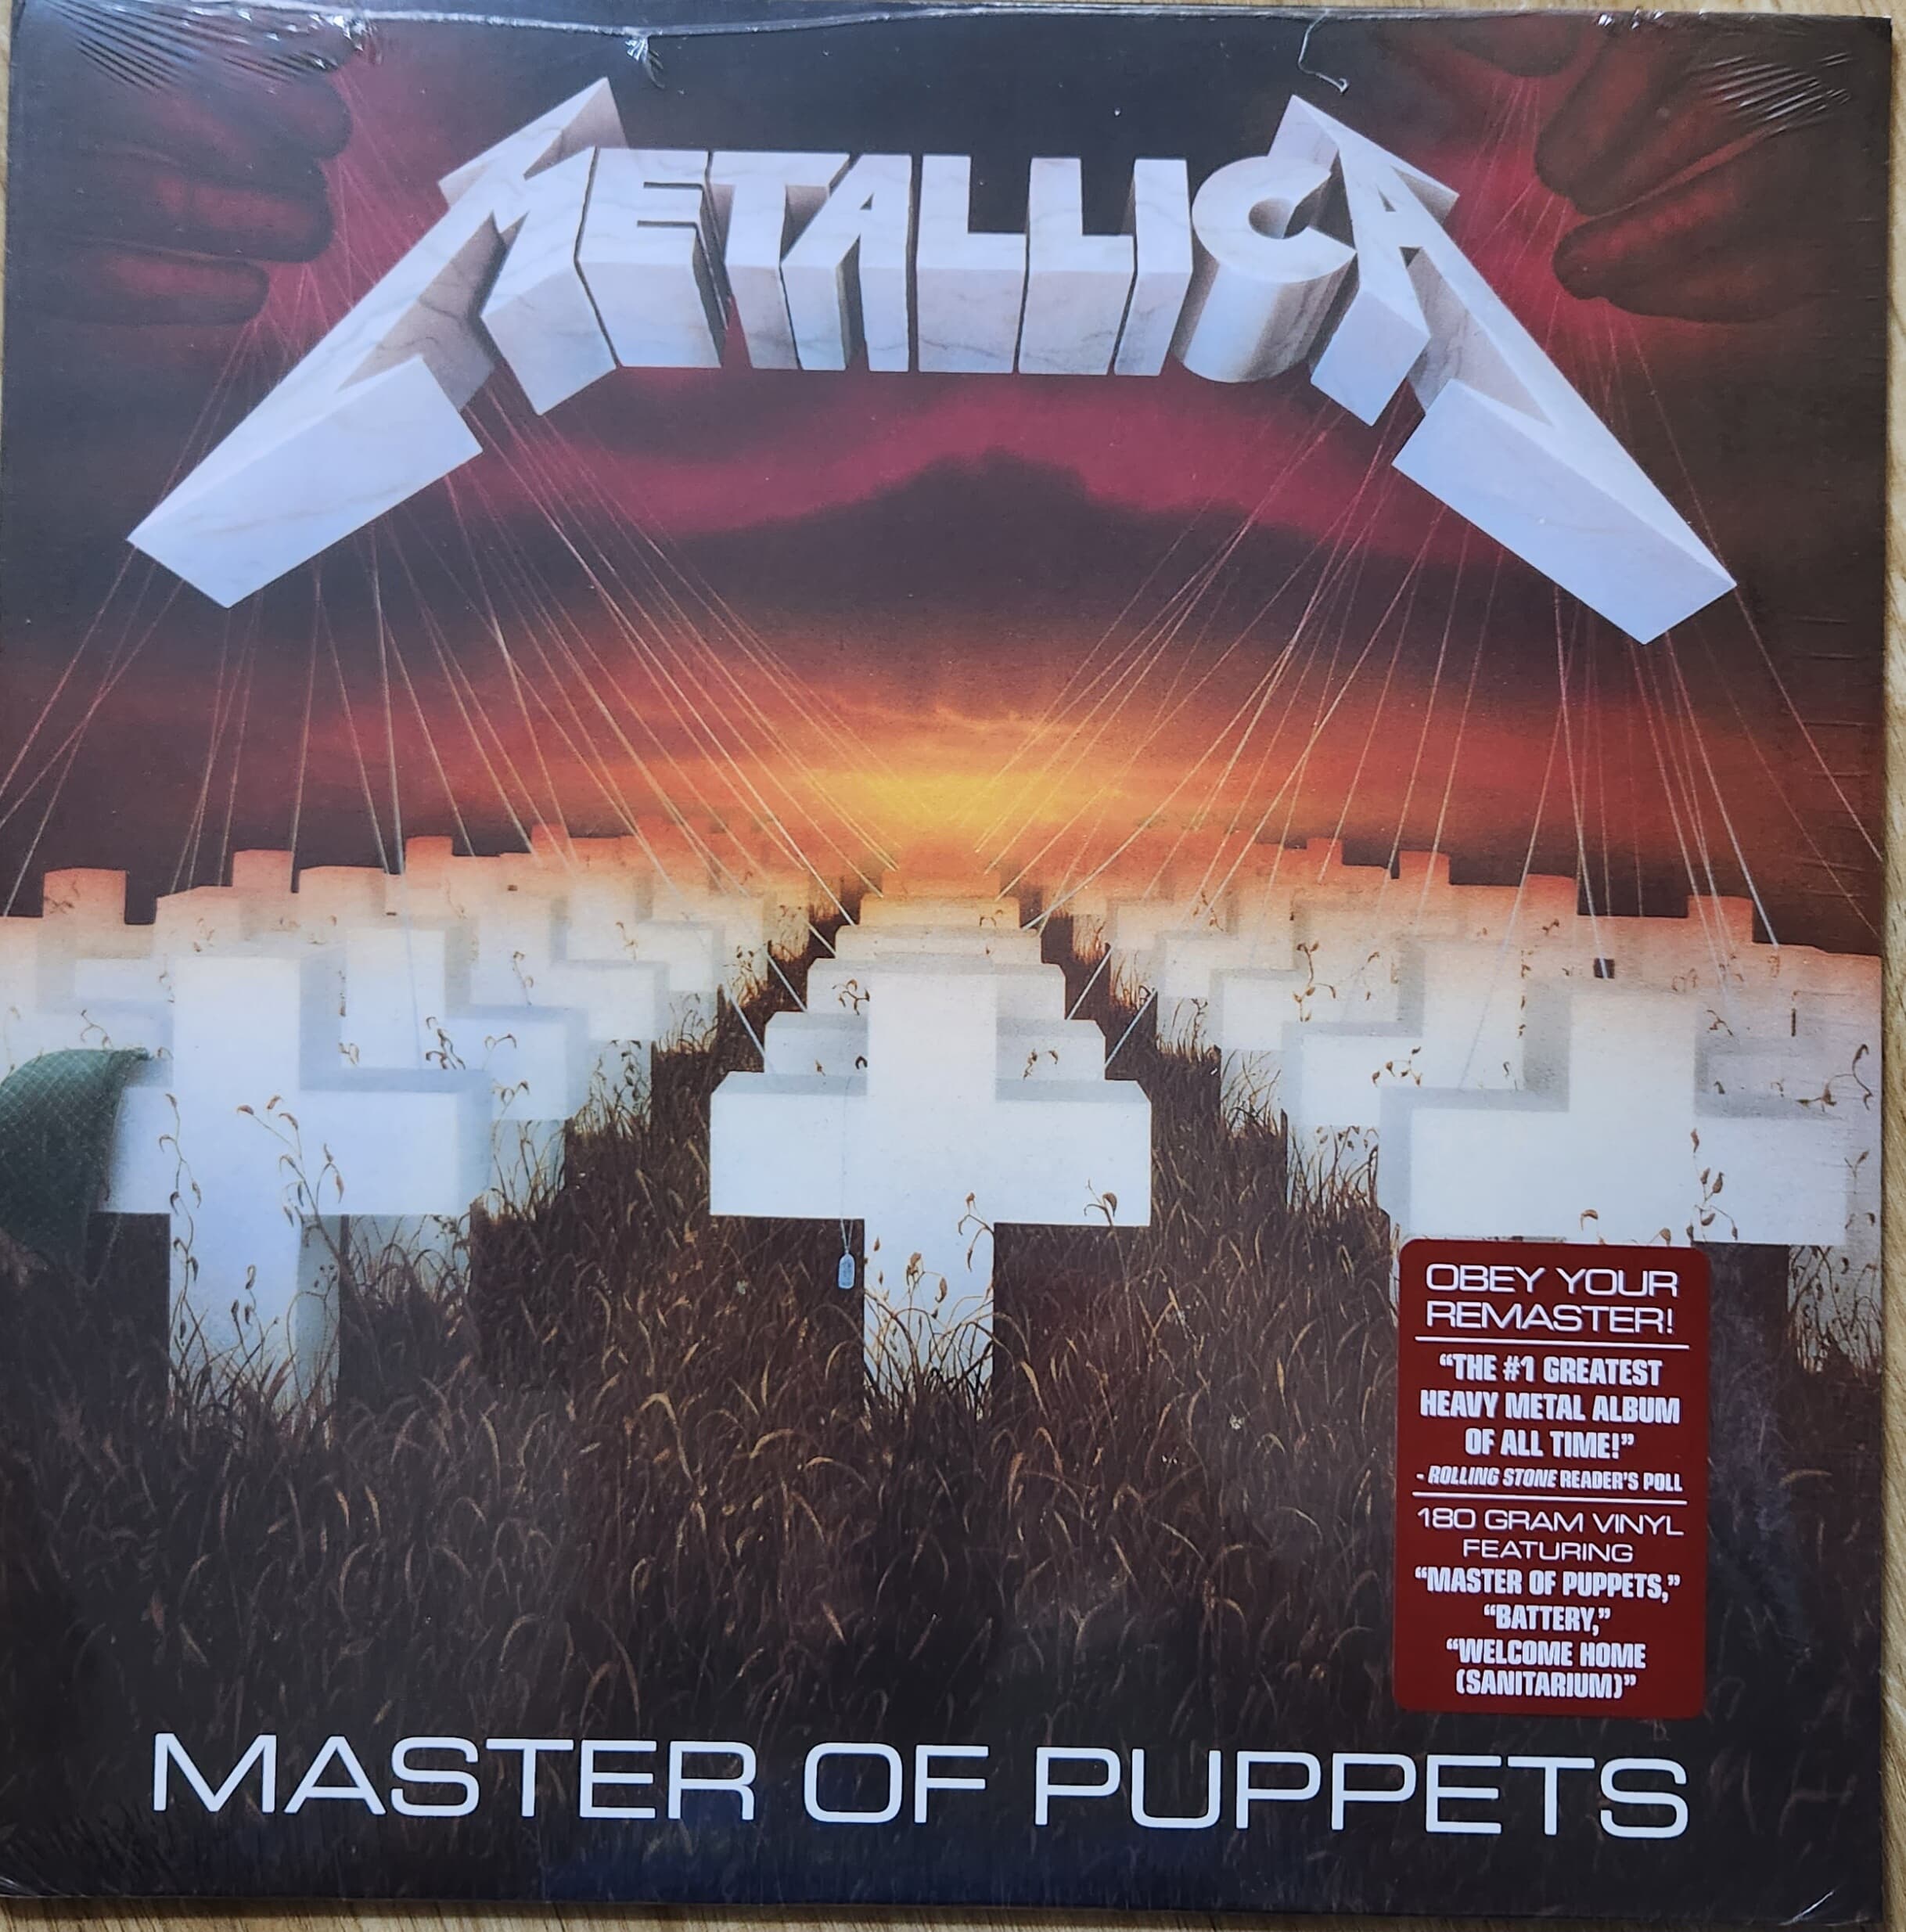 Metallica - Master Of Puppets (Remastered)(LP)